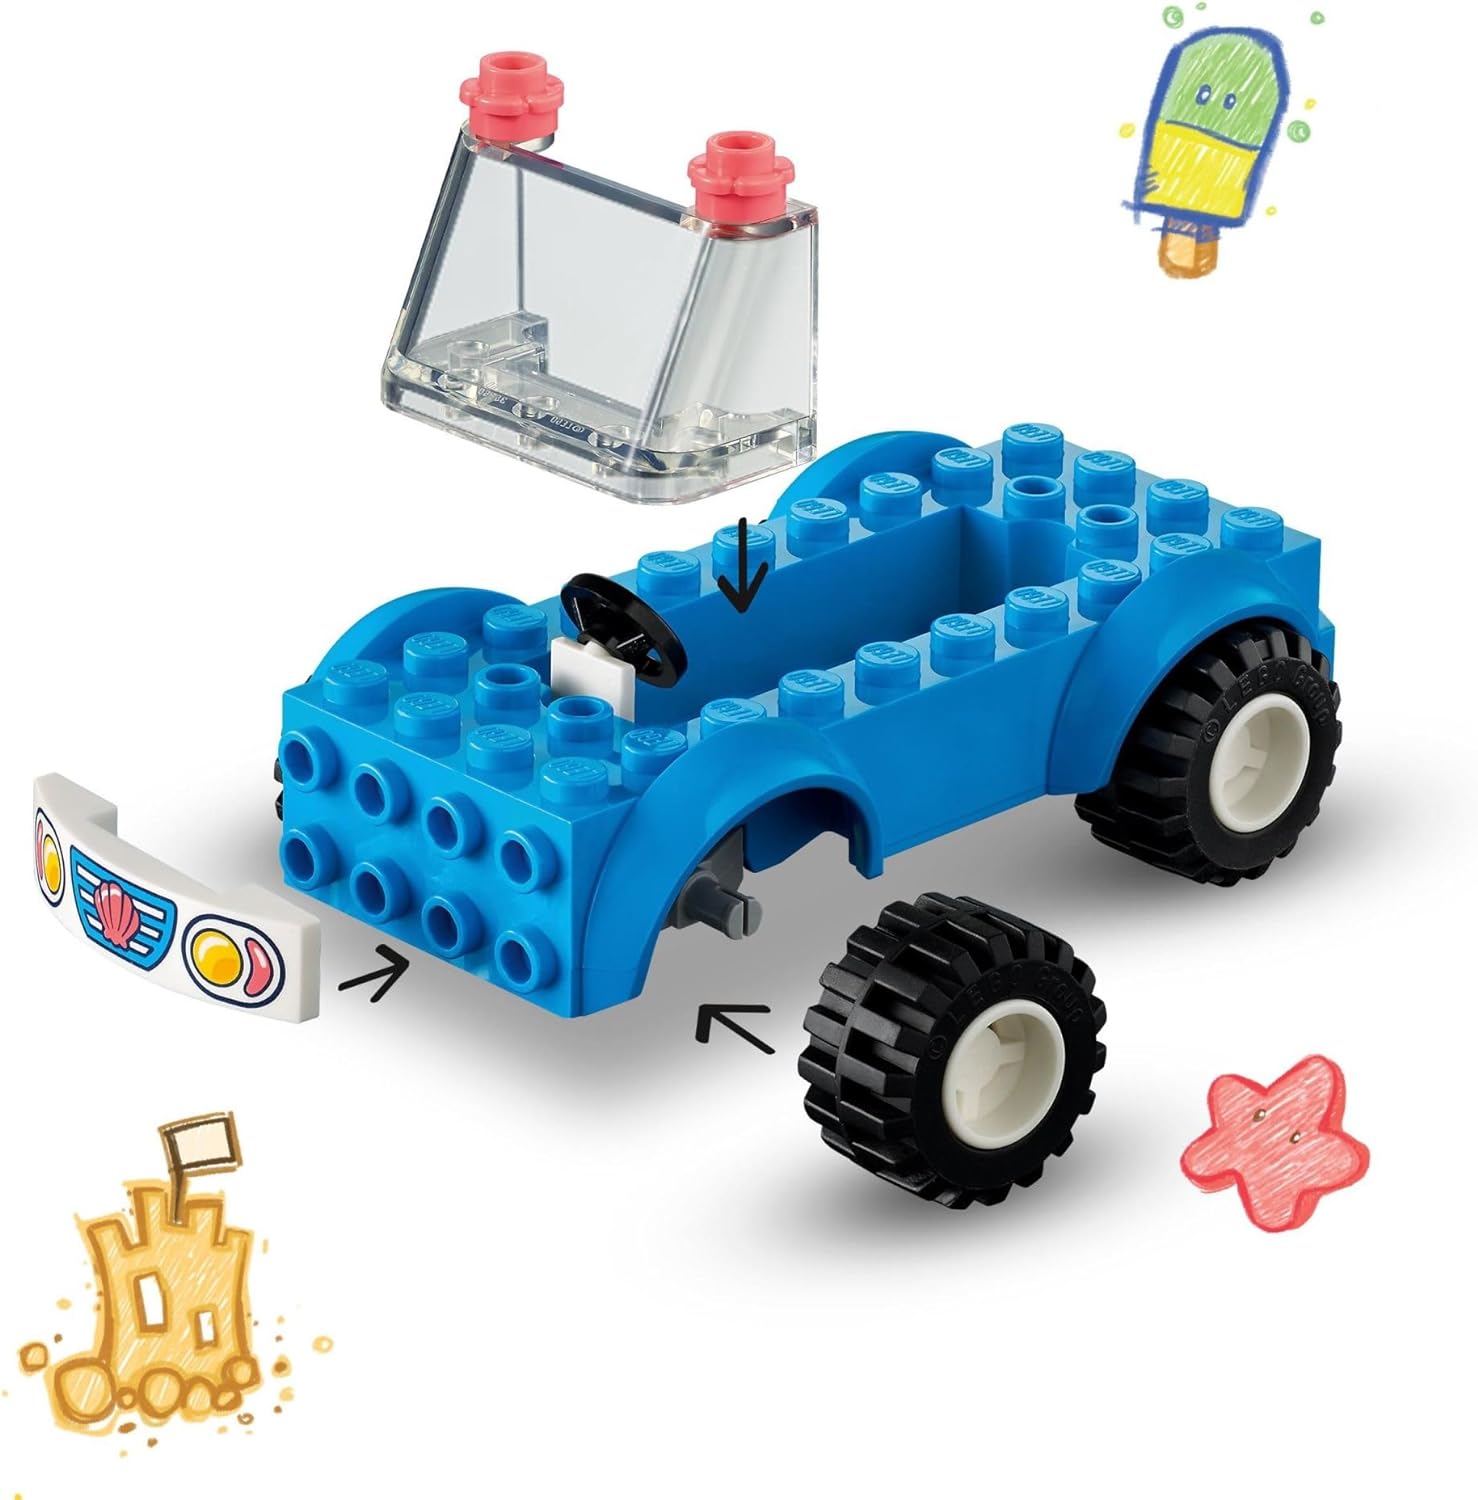 LEGO 41725  Friends Beach Buggy Fun Building Toy Set, Creative Fun for Toddlers Ages 4+, with 2 Mini-Dolls, Pet Dog and Dolphin Figures, a Beach Buggy Toy Car and Accessories